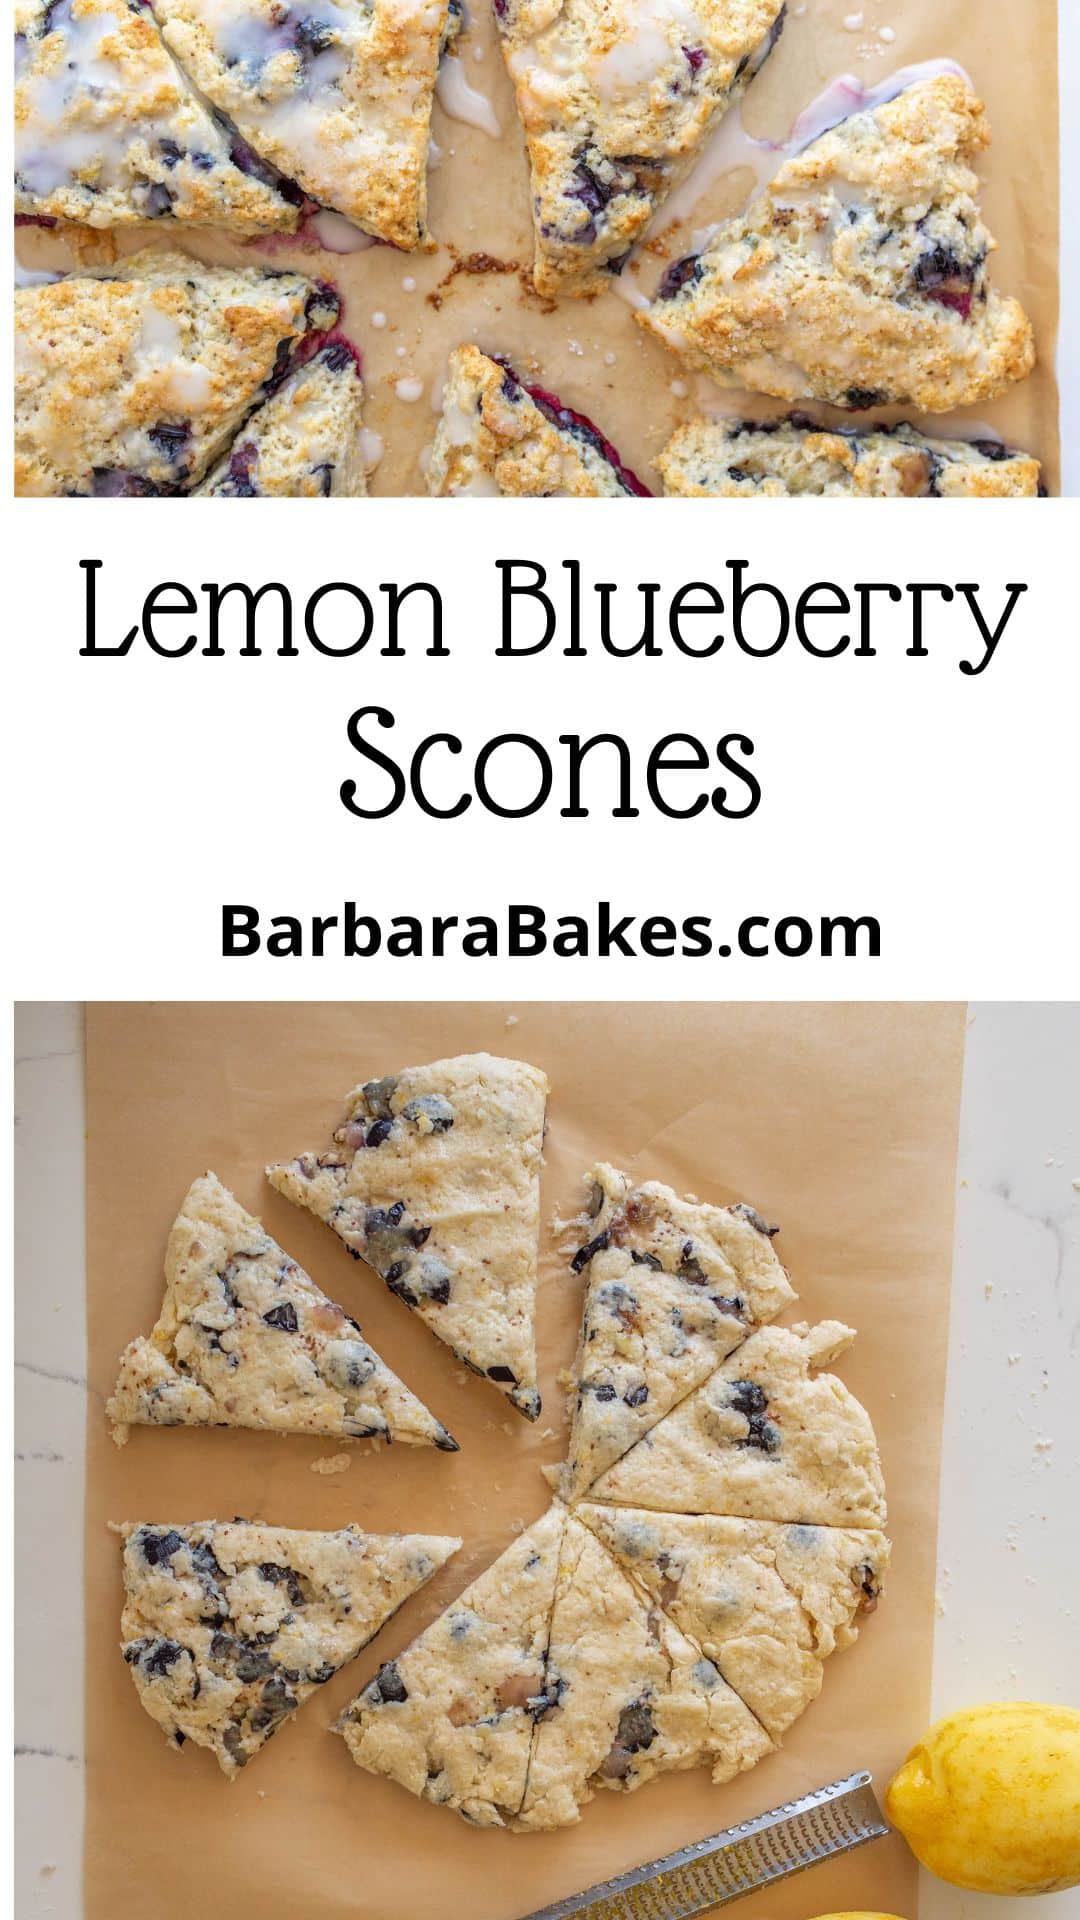 Lemon blueberry scones are made with cream instead of butter, fresh lemon zest, fresh or frozen blueberries and they are a perfect anytime of day! via @barbarabakes